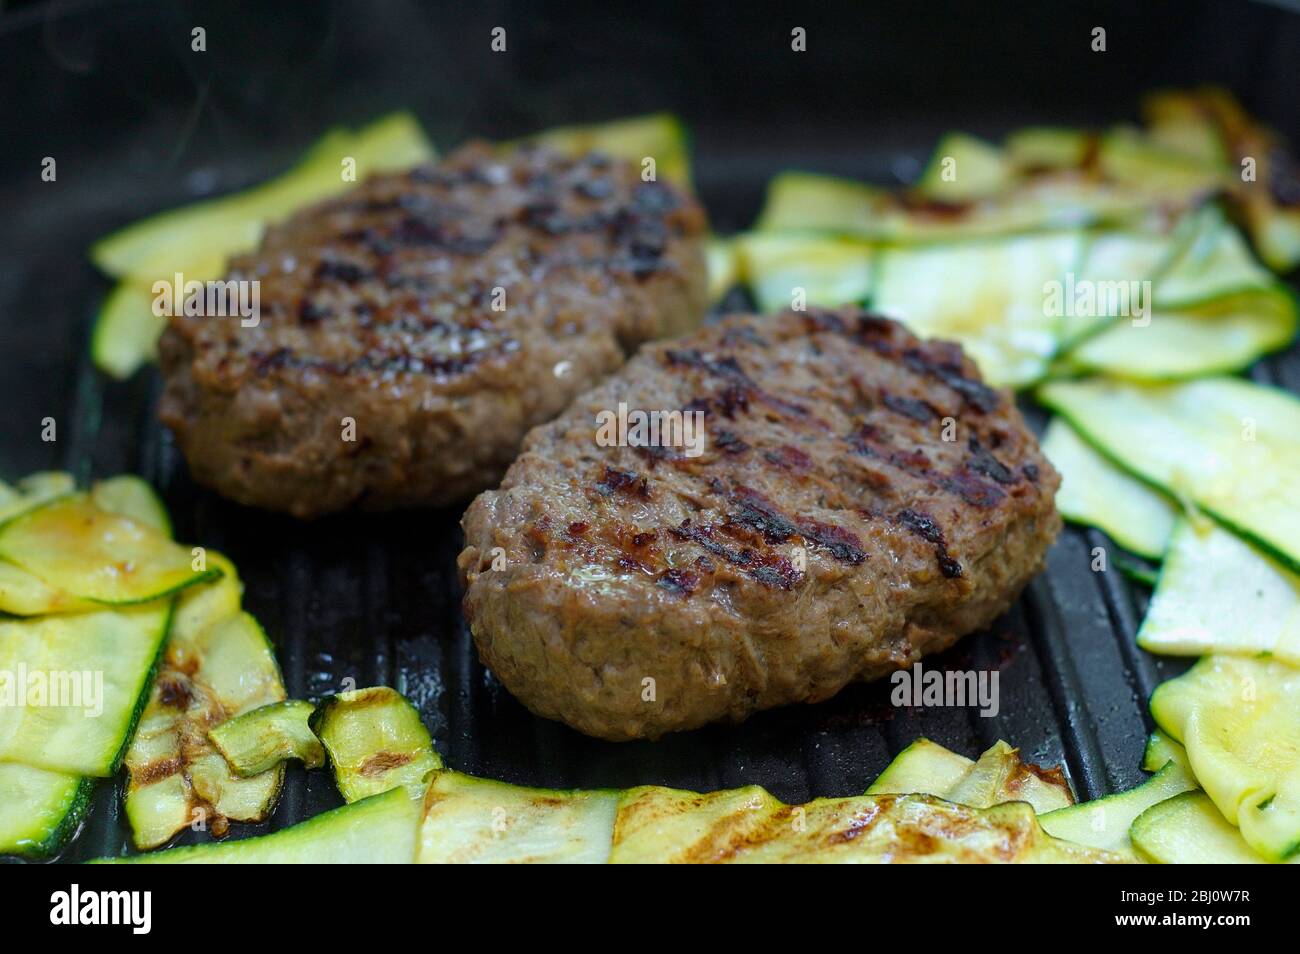 Venison burgers being grilled on hot griddle with slivers of courgettes drizzled with olive oil being cooked around them - Stock Photo